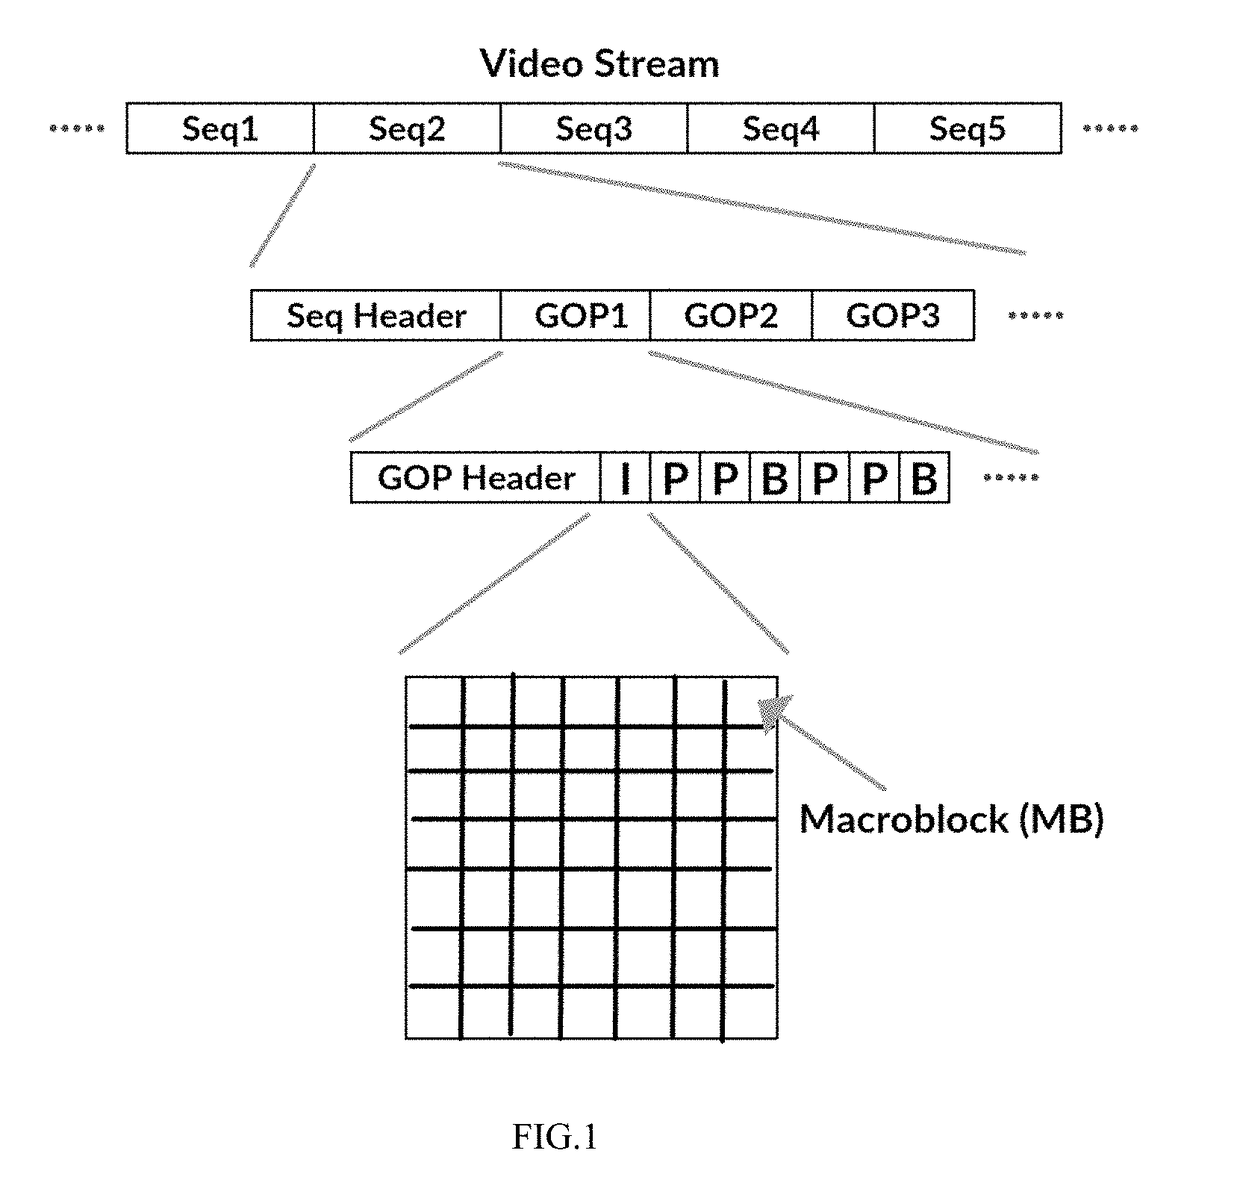 Architecture and method for high performance on demand video transcoding